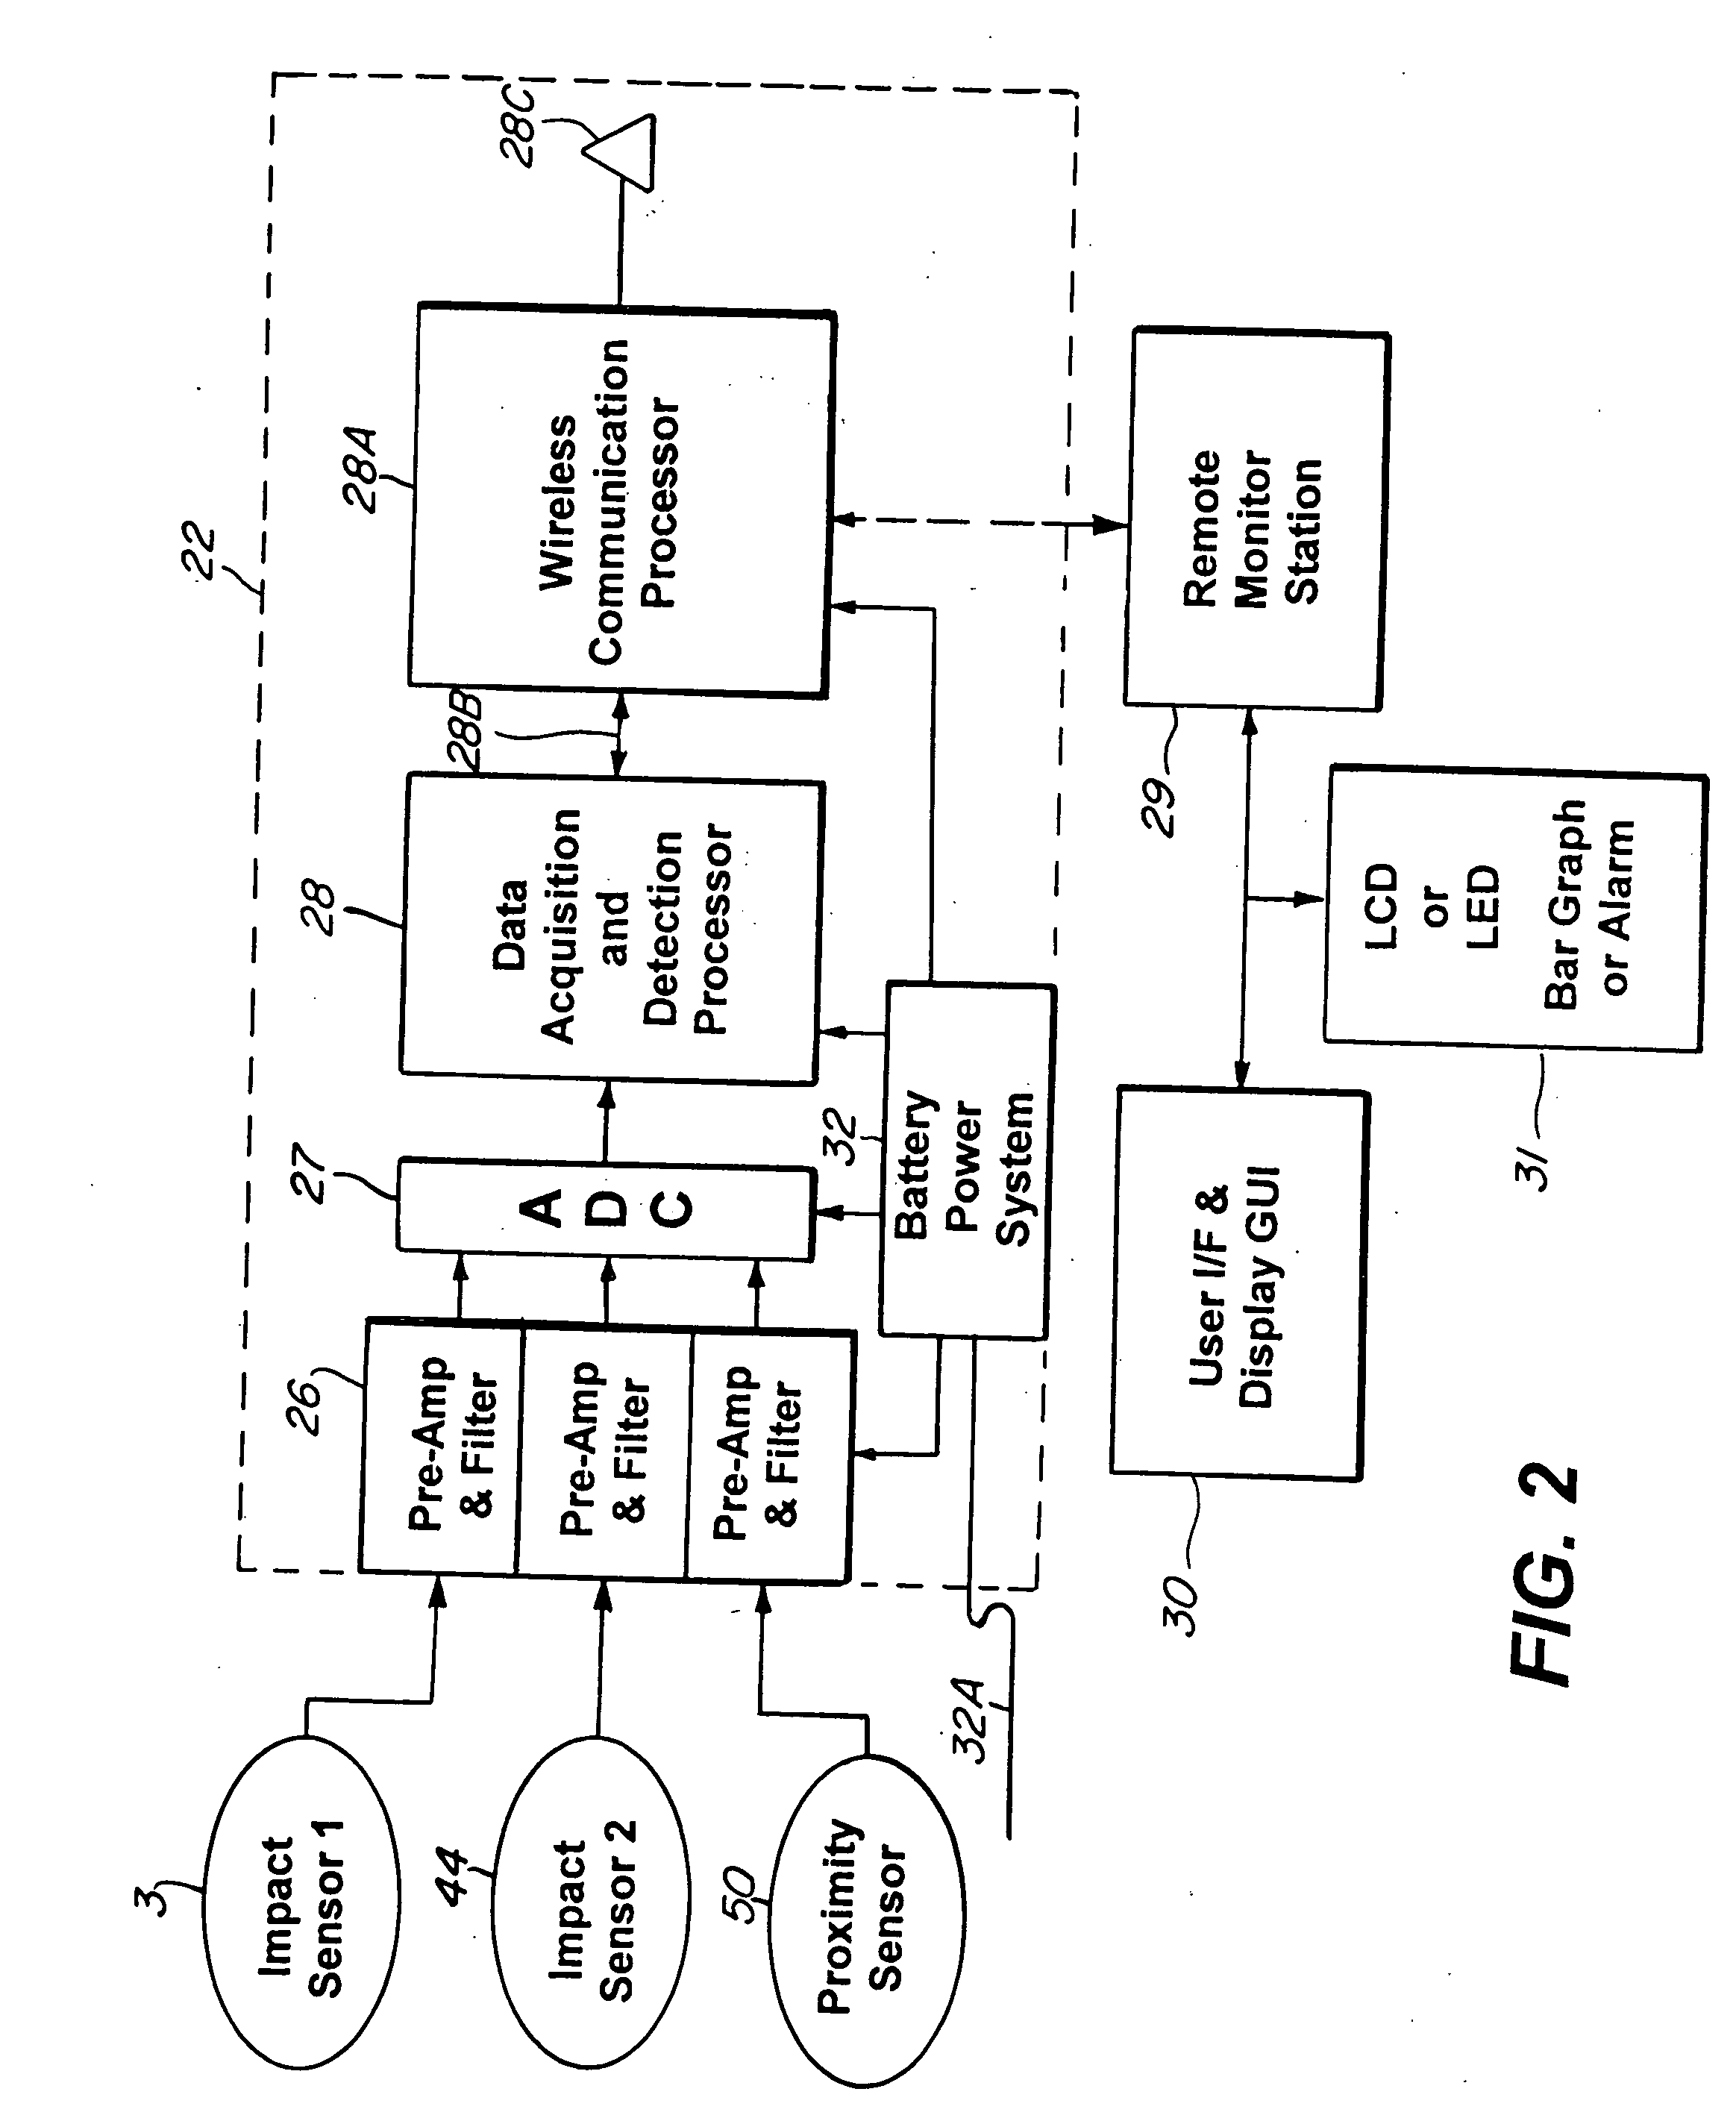 Apparatus for monitoring and registering the location and intensity of impacts in sports